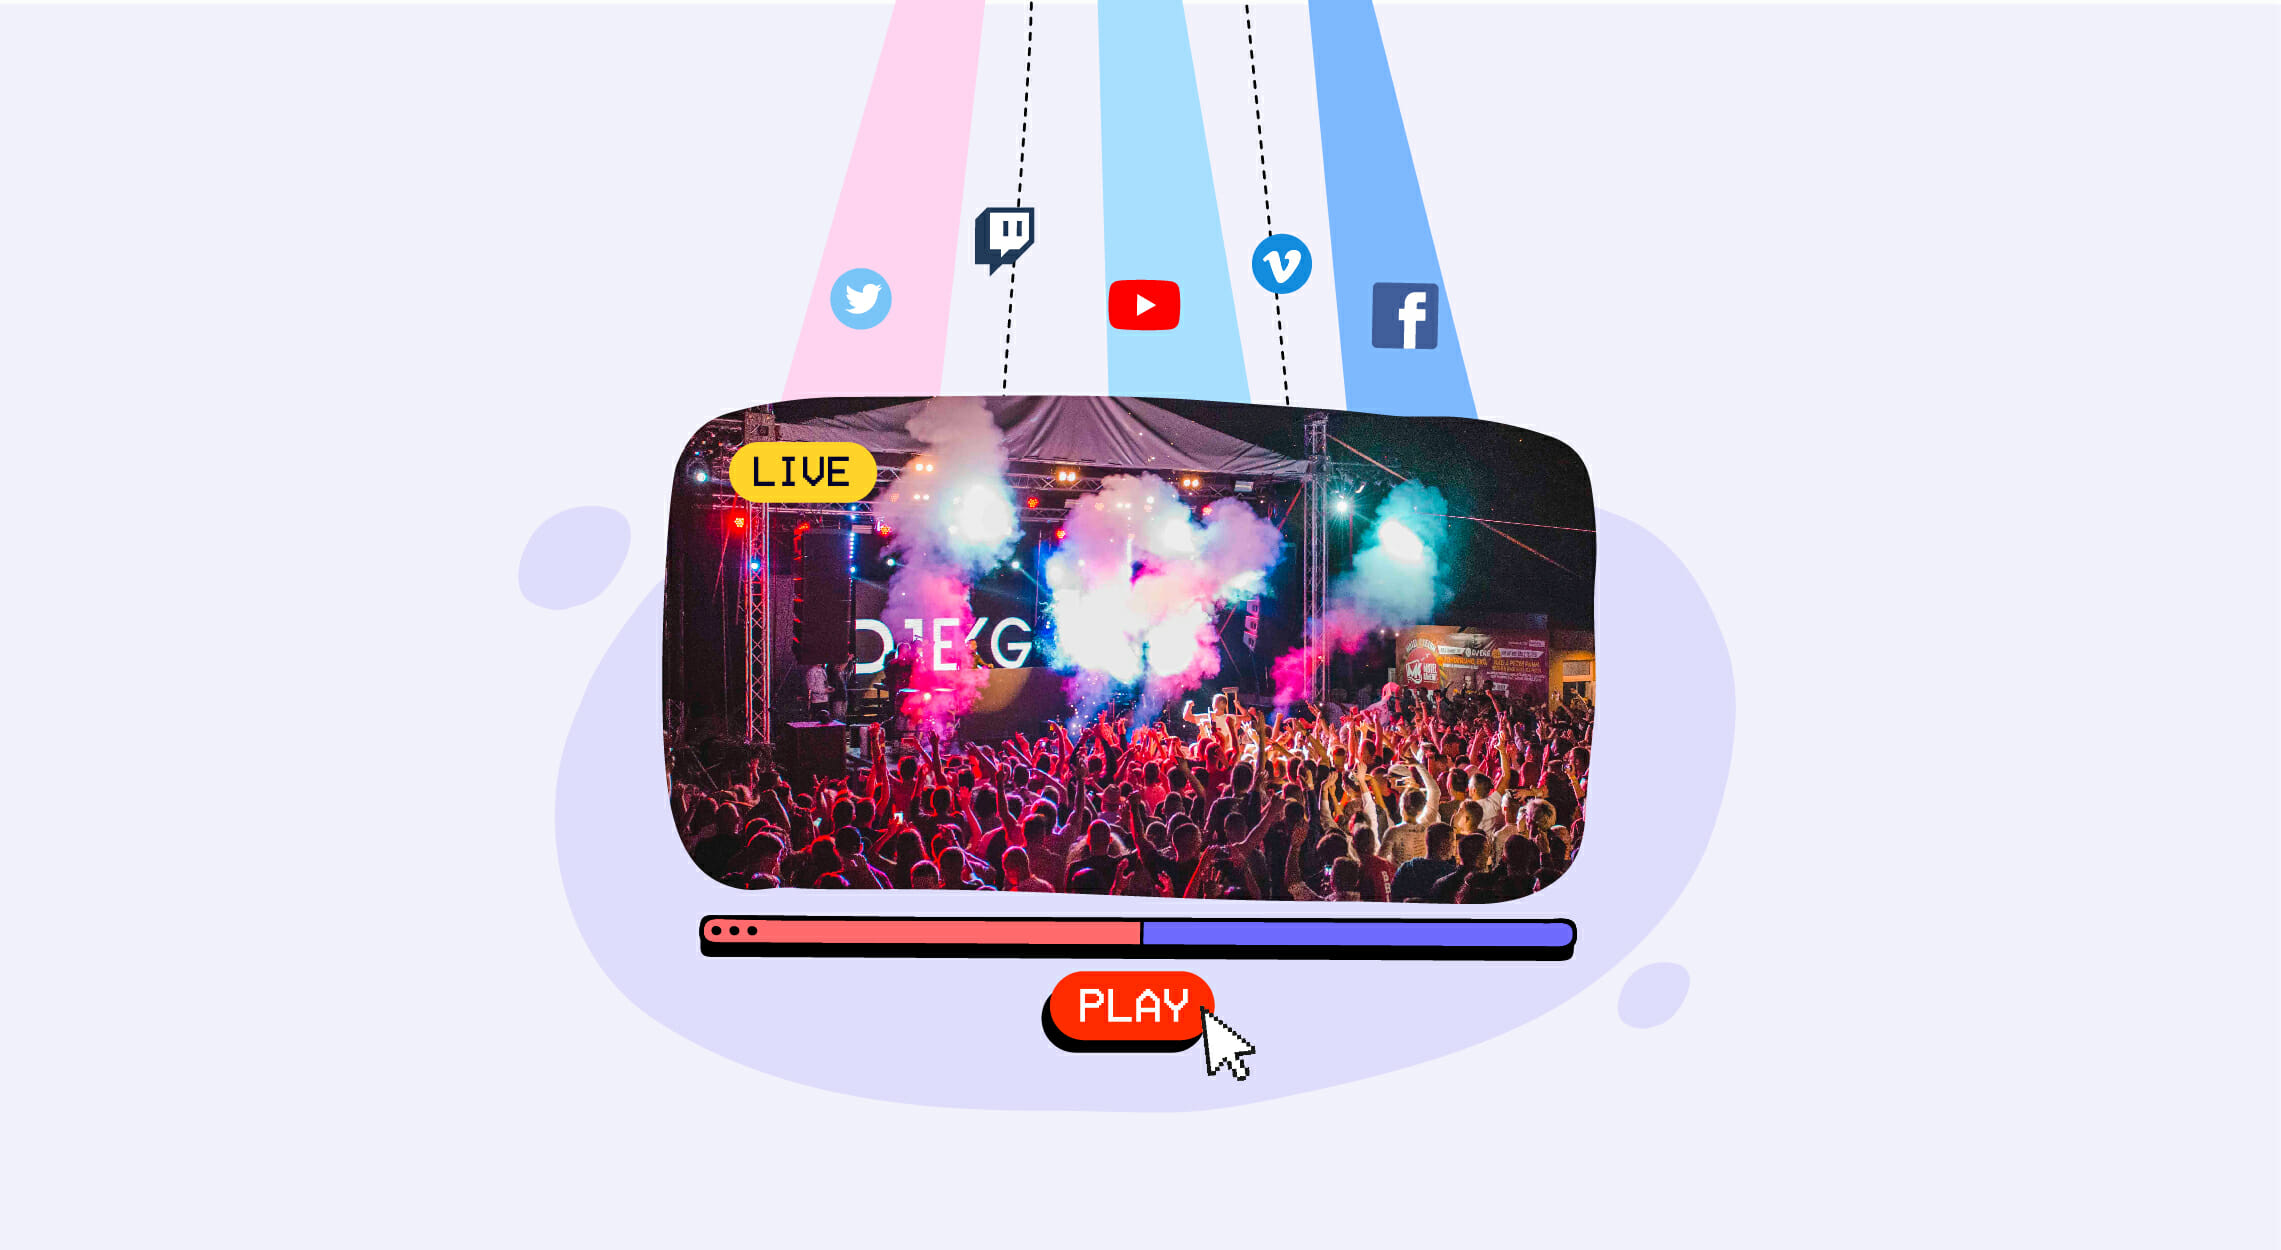 The Best VJ Software for Live Events